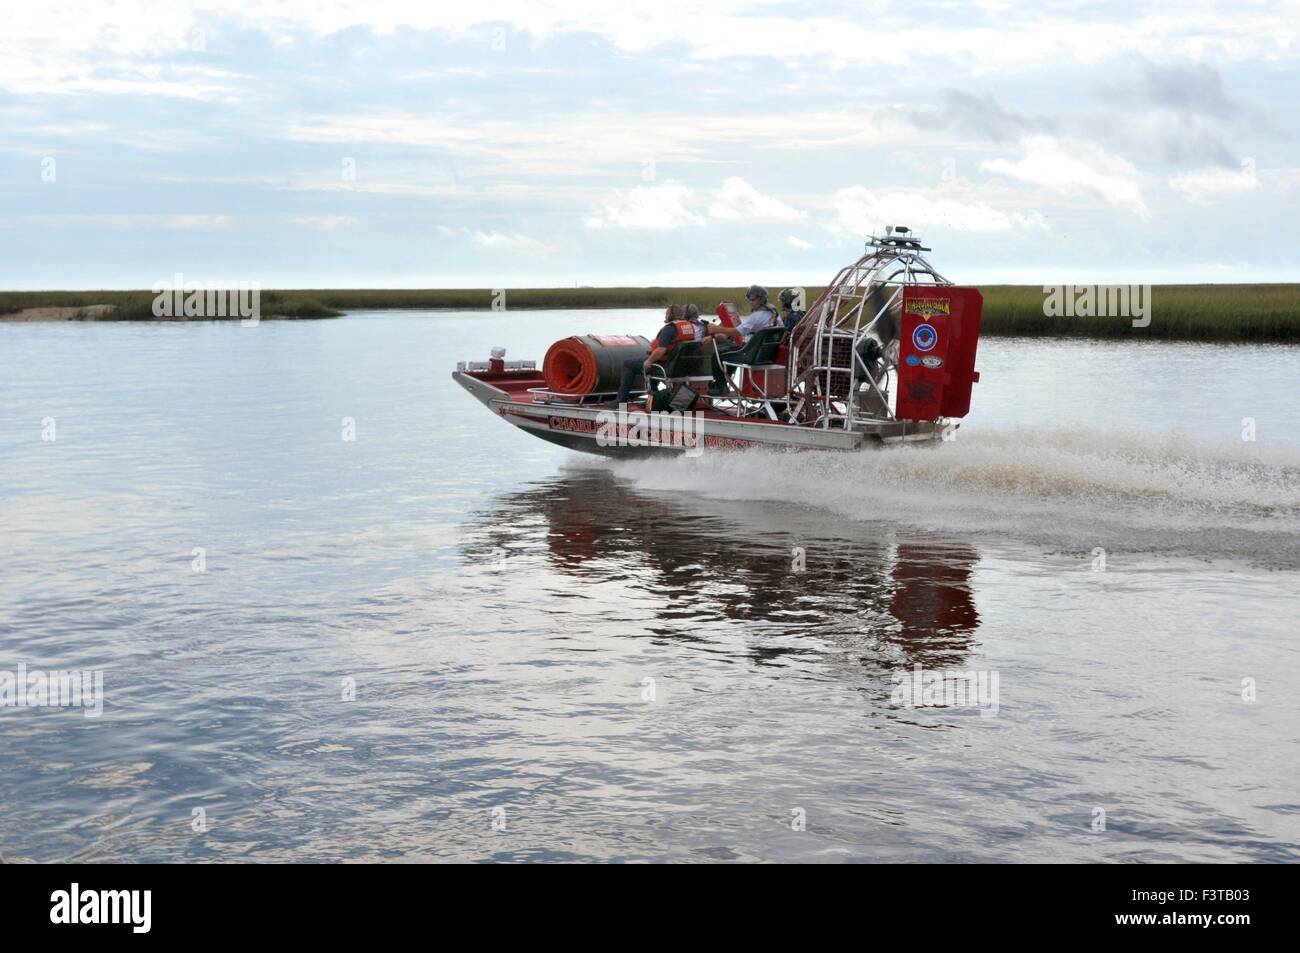 Charleston County Rescue Squad patrols the Intracoastal Waterway by airboat following massive floods October 10, 2015 in McClellanville, South Carolina. Large parts of South Carolina suffered from record setting rains that flooded large portions of the state. Stock Photo